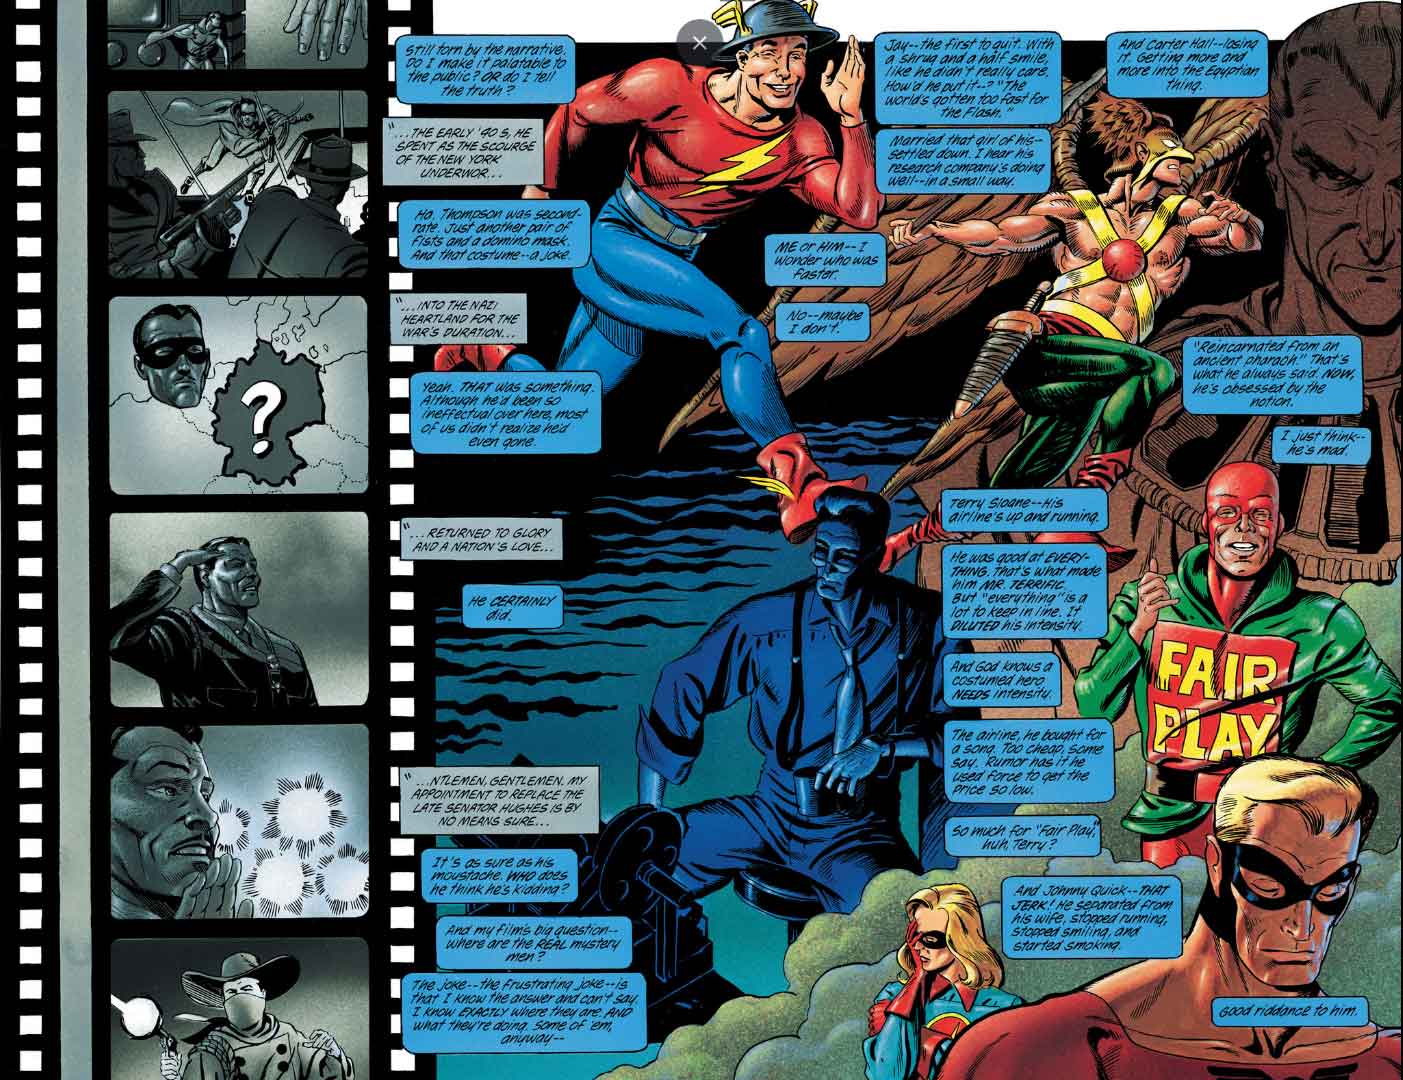 THE GOLDEN AGE an Elseworlds mini-series by James Robinson and Paul Smith